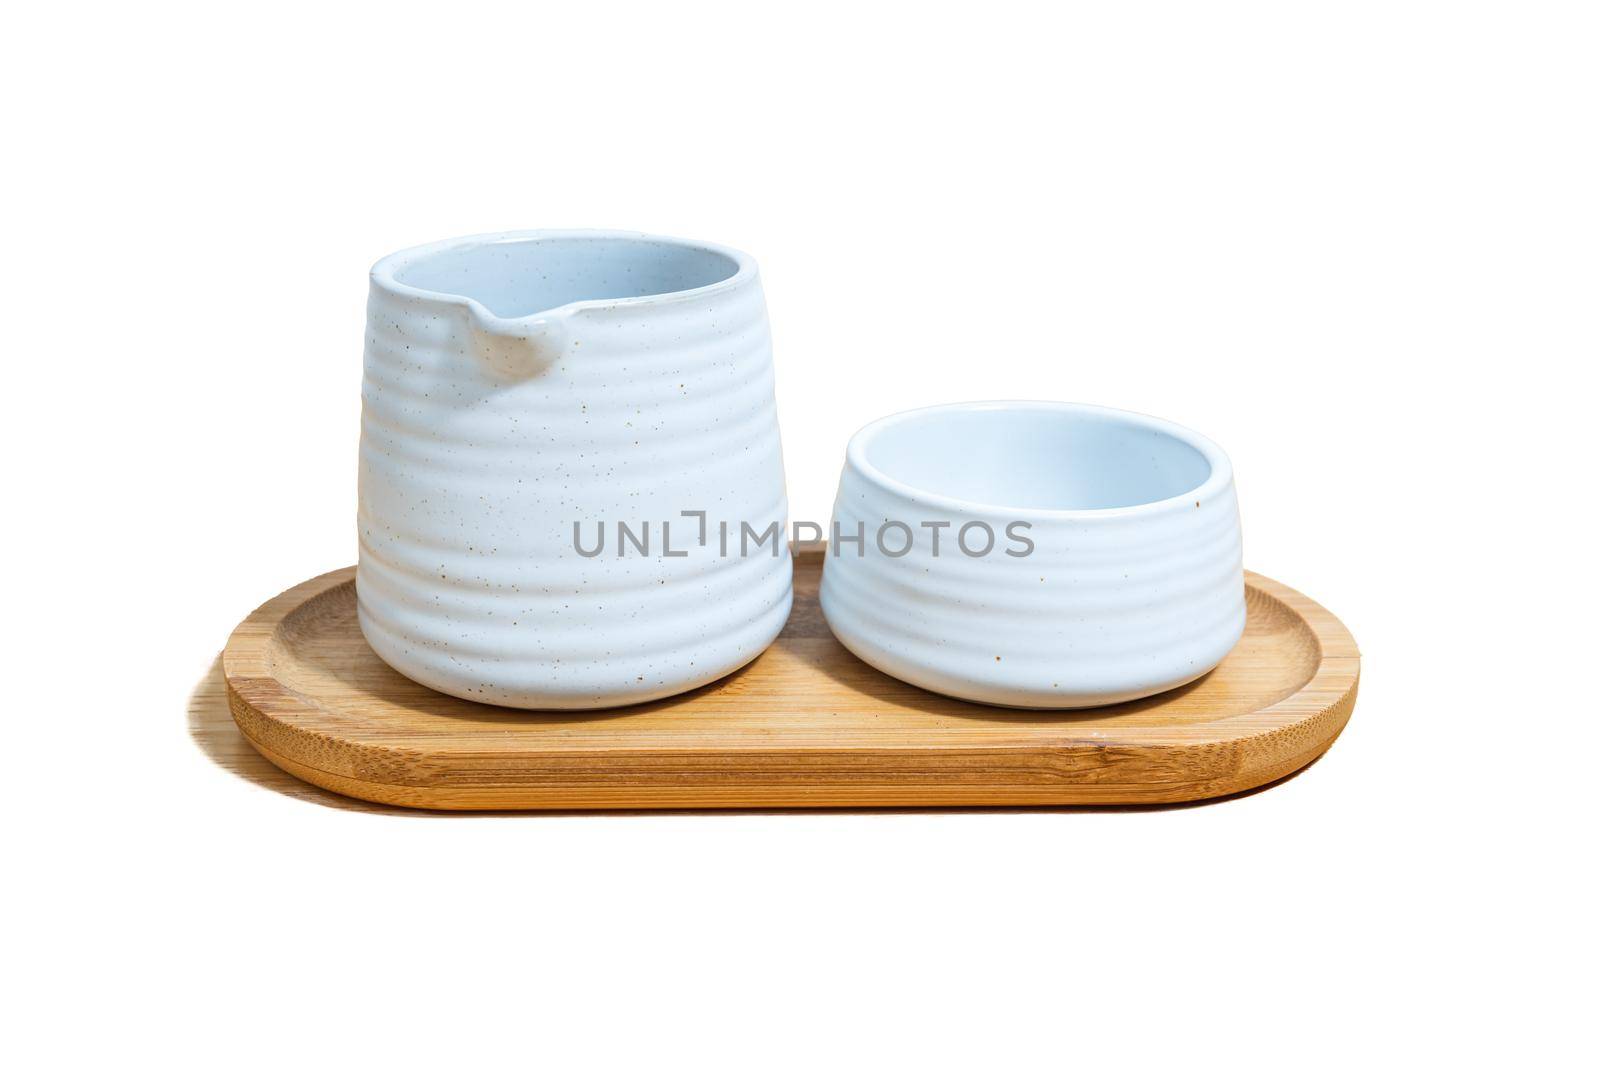 A set of ceramic mug and jug of tea, made of white clay, on a wooden plate on white background.